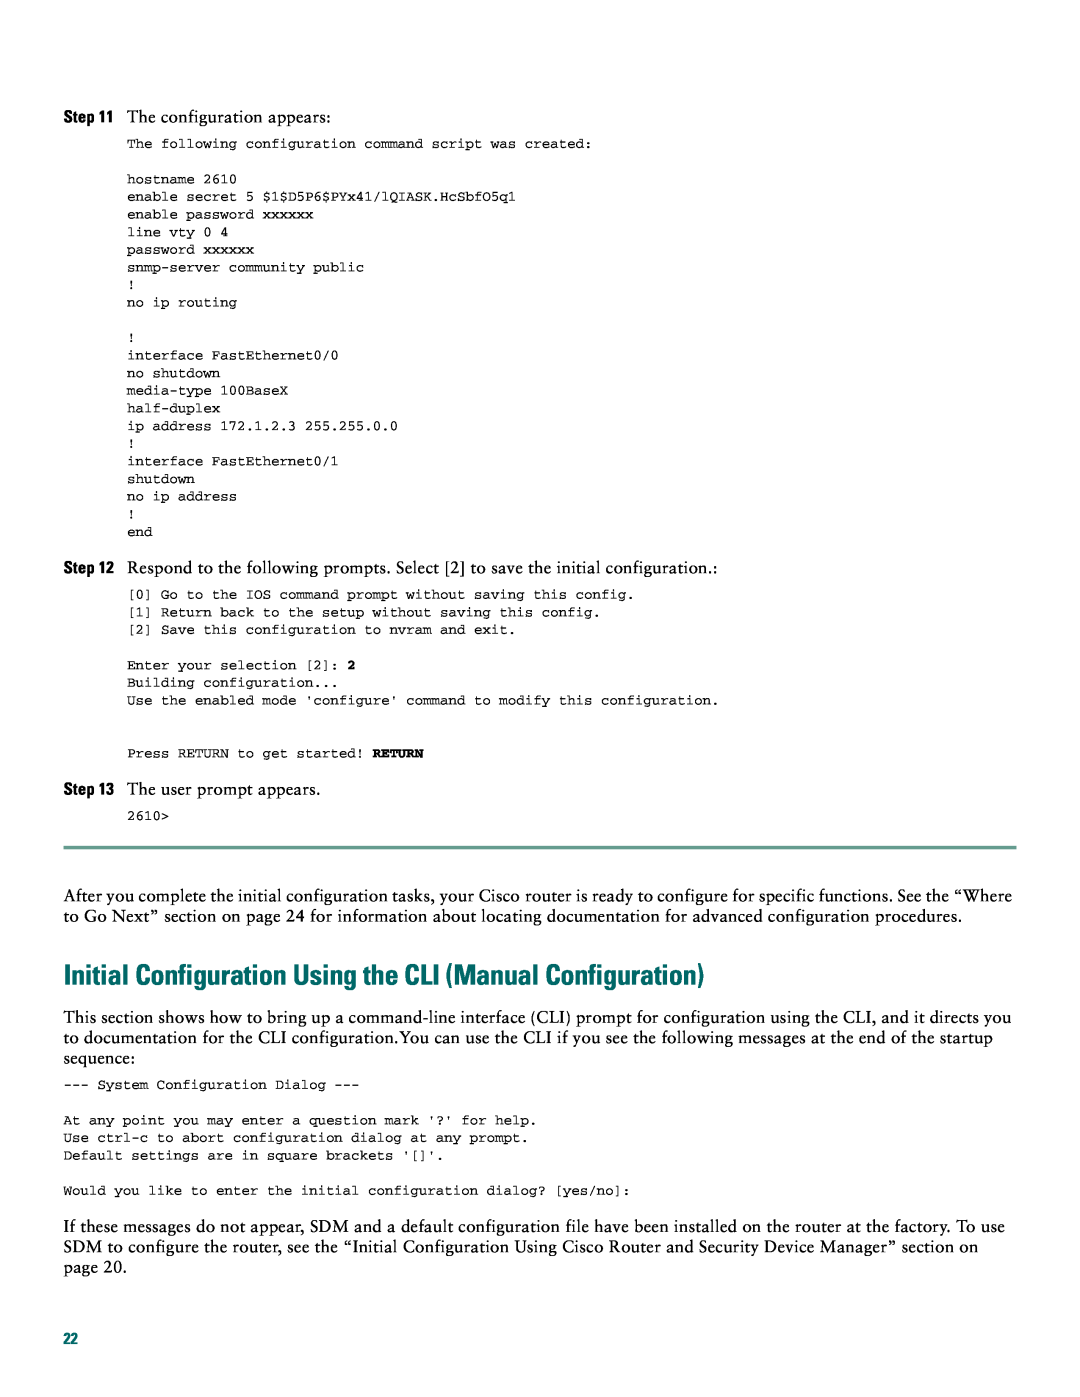 Cisco Systems 2600XM, 2612 quick start Initial Configuration Using the CLI Manual Configuration 